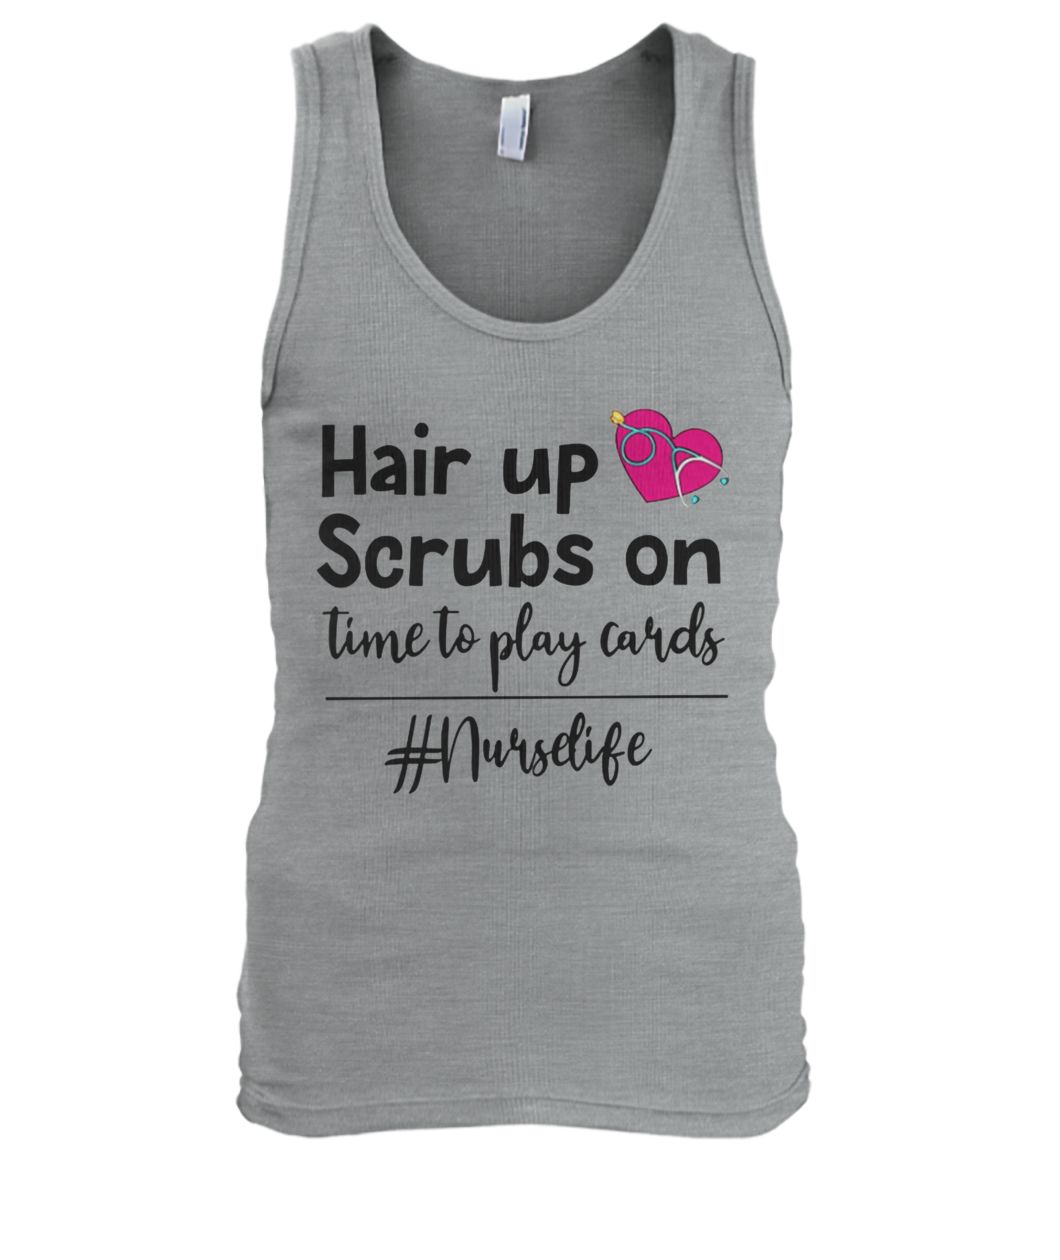 Nurse life hair up scrubs on time to play cards men's tank top